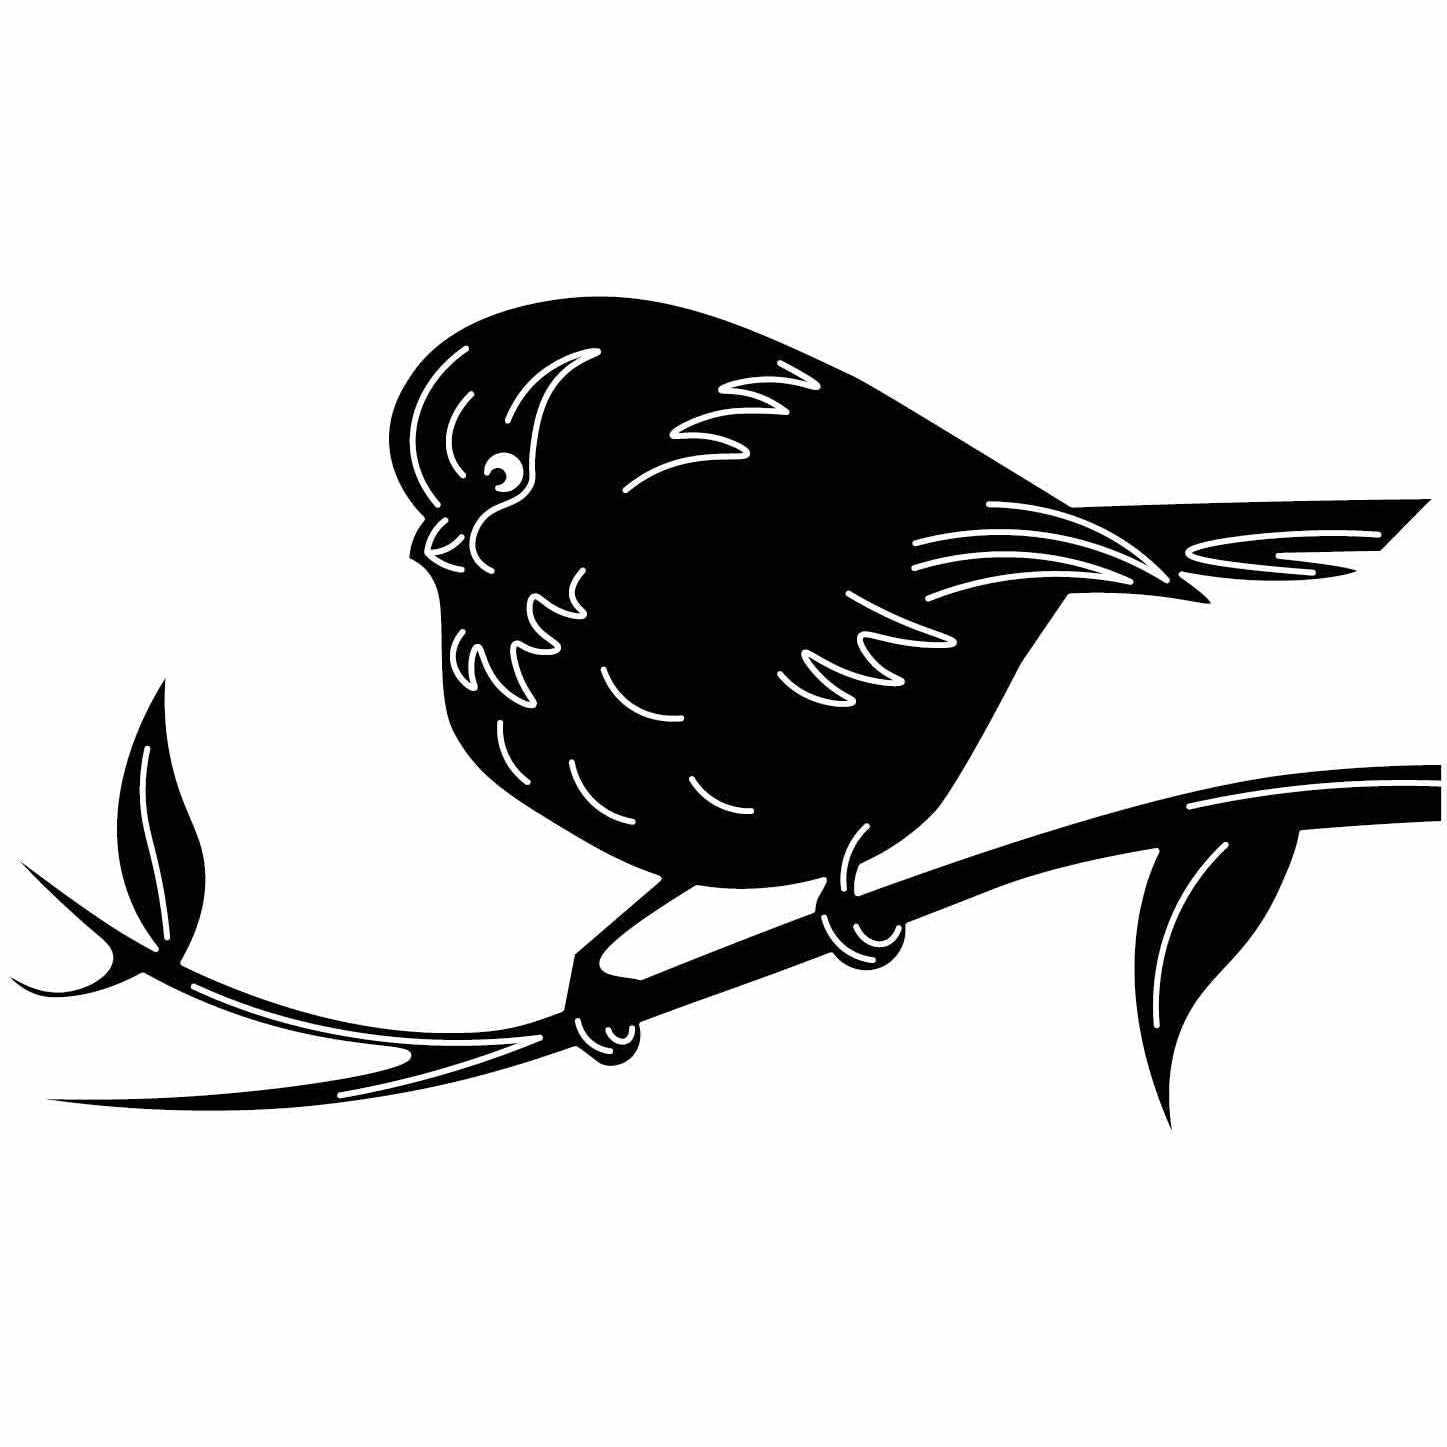 Bird on Branch with Leaves Free-DXF files Cut Ready CNC Designs-DXFforCNC.com